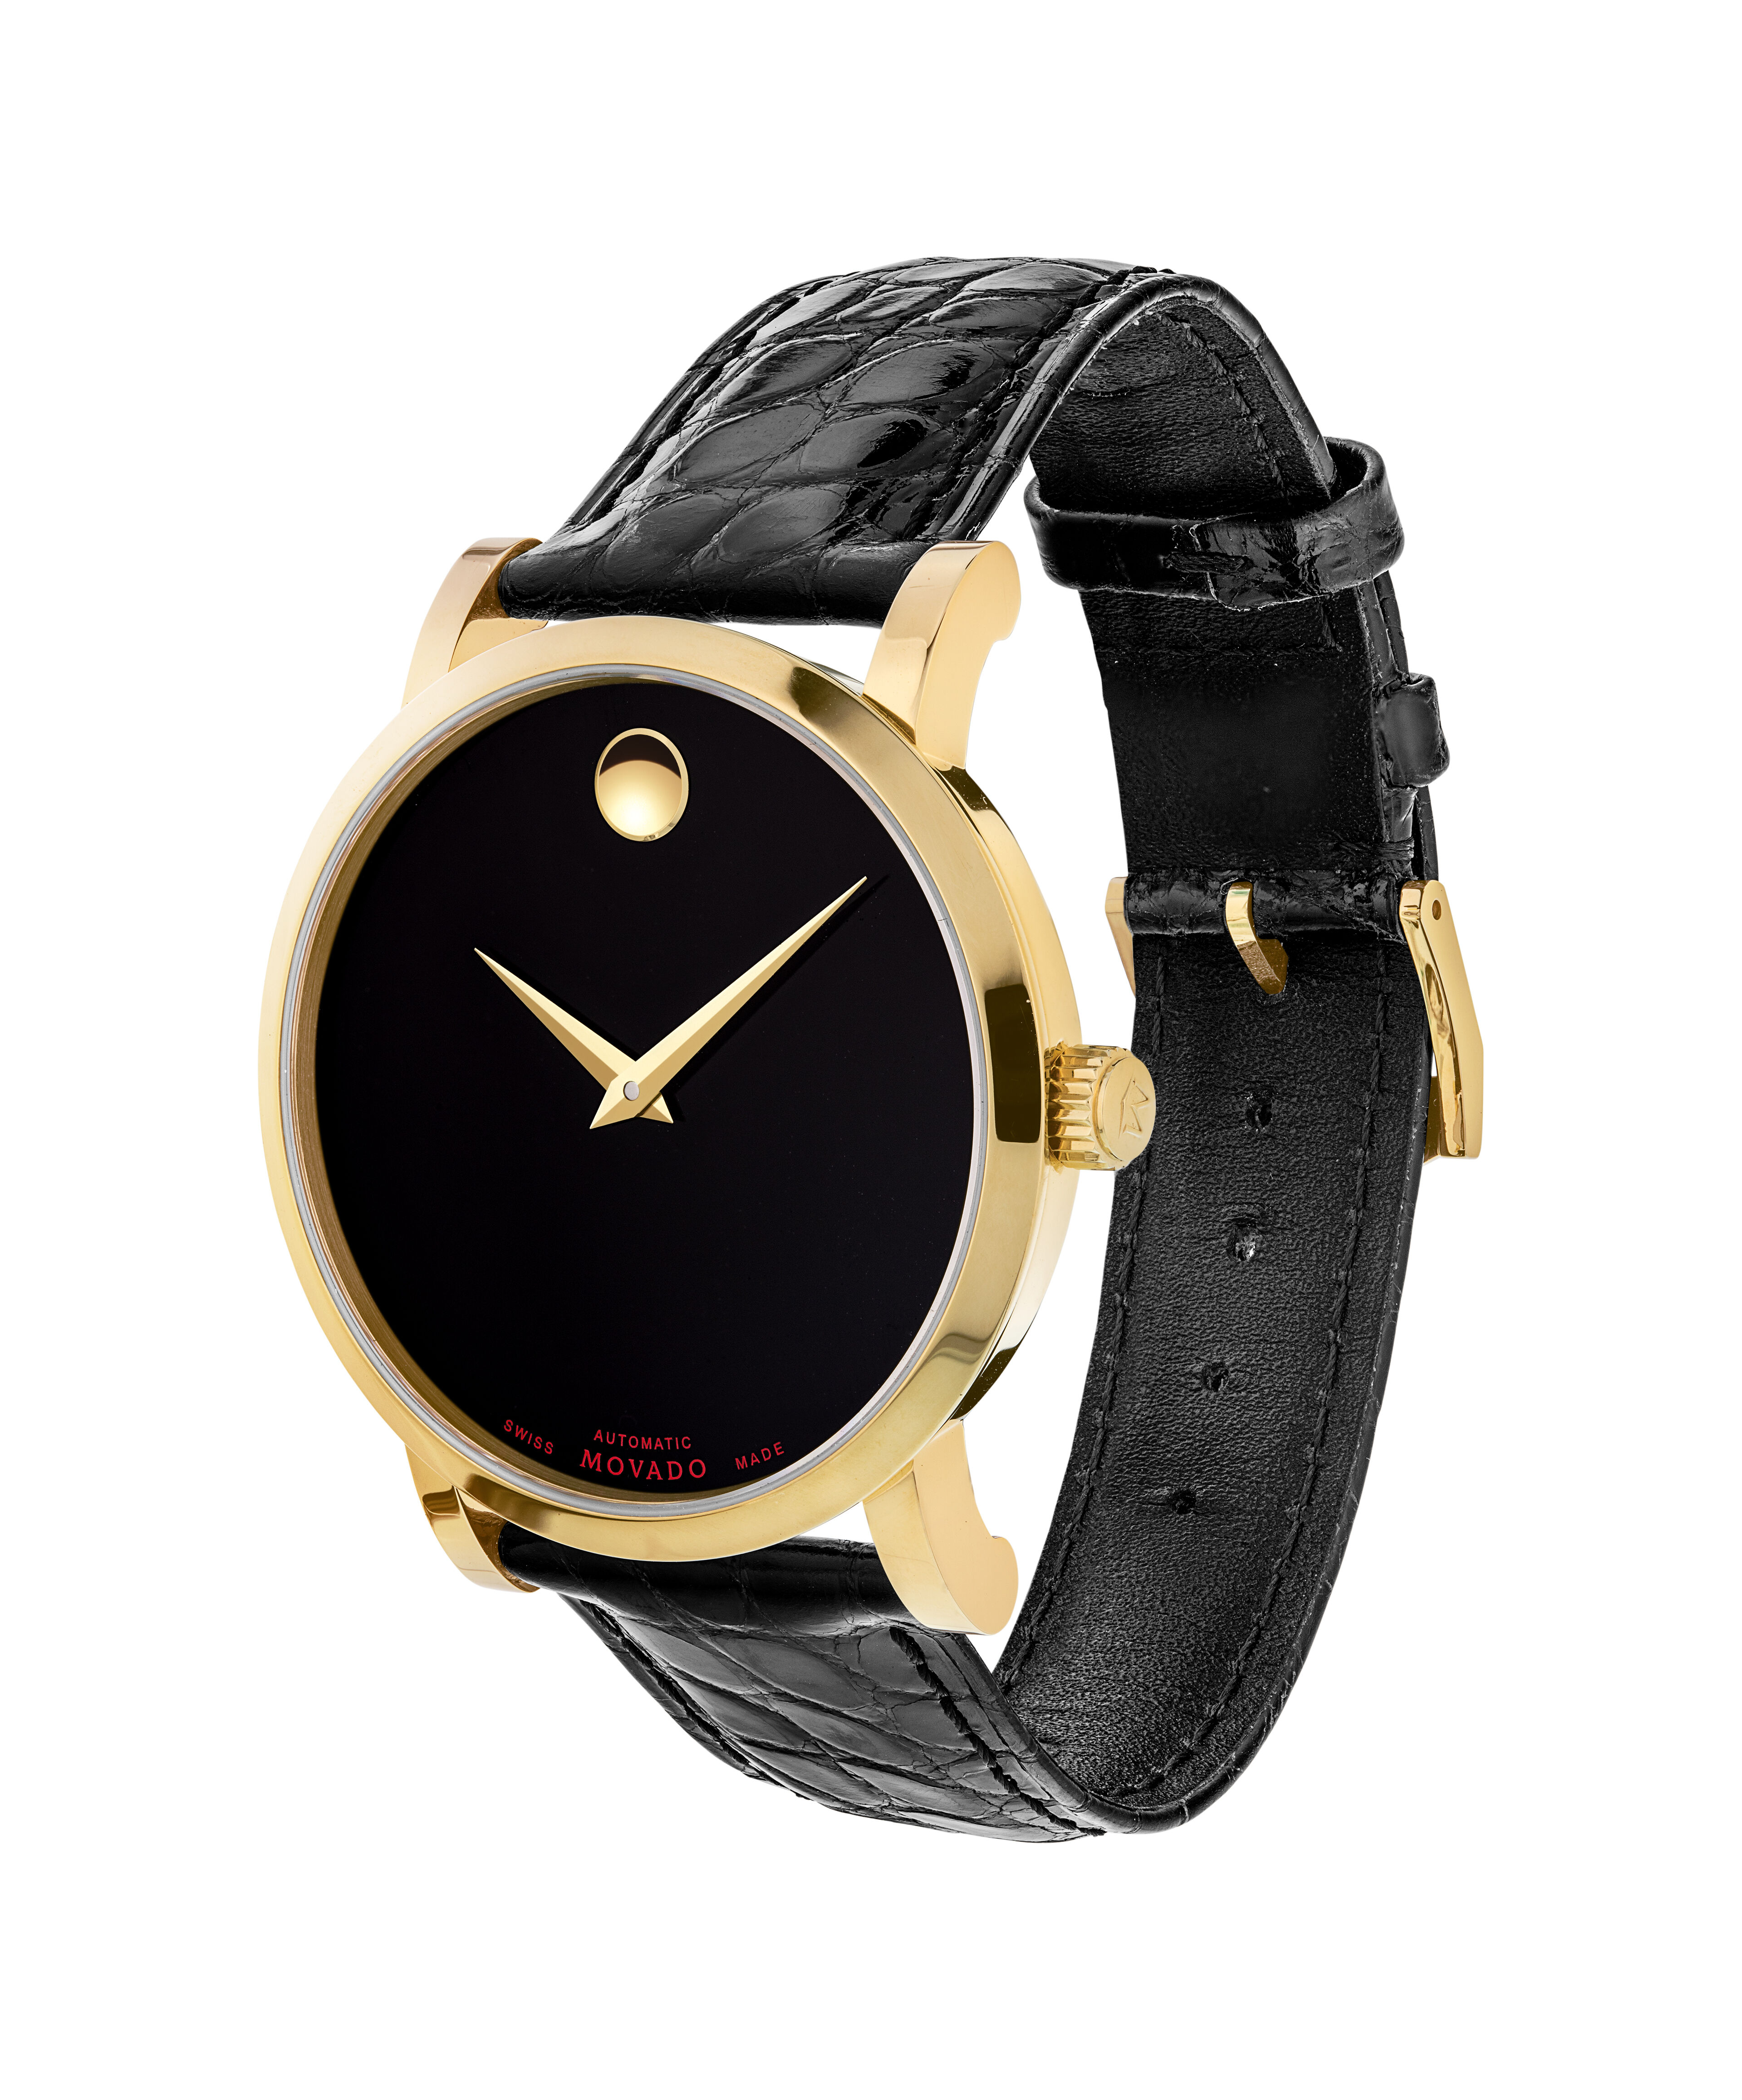 Movado Mobard MOVADO 40.A8.620 Men's Watch Hand-wound WhiteMovado Mobard SS × Leather